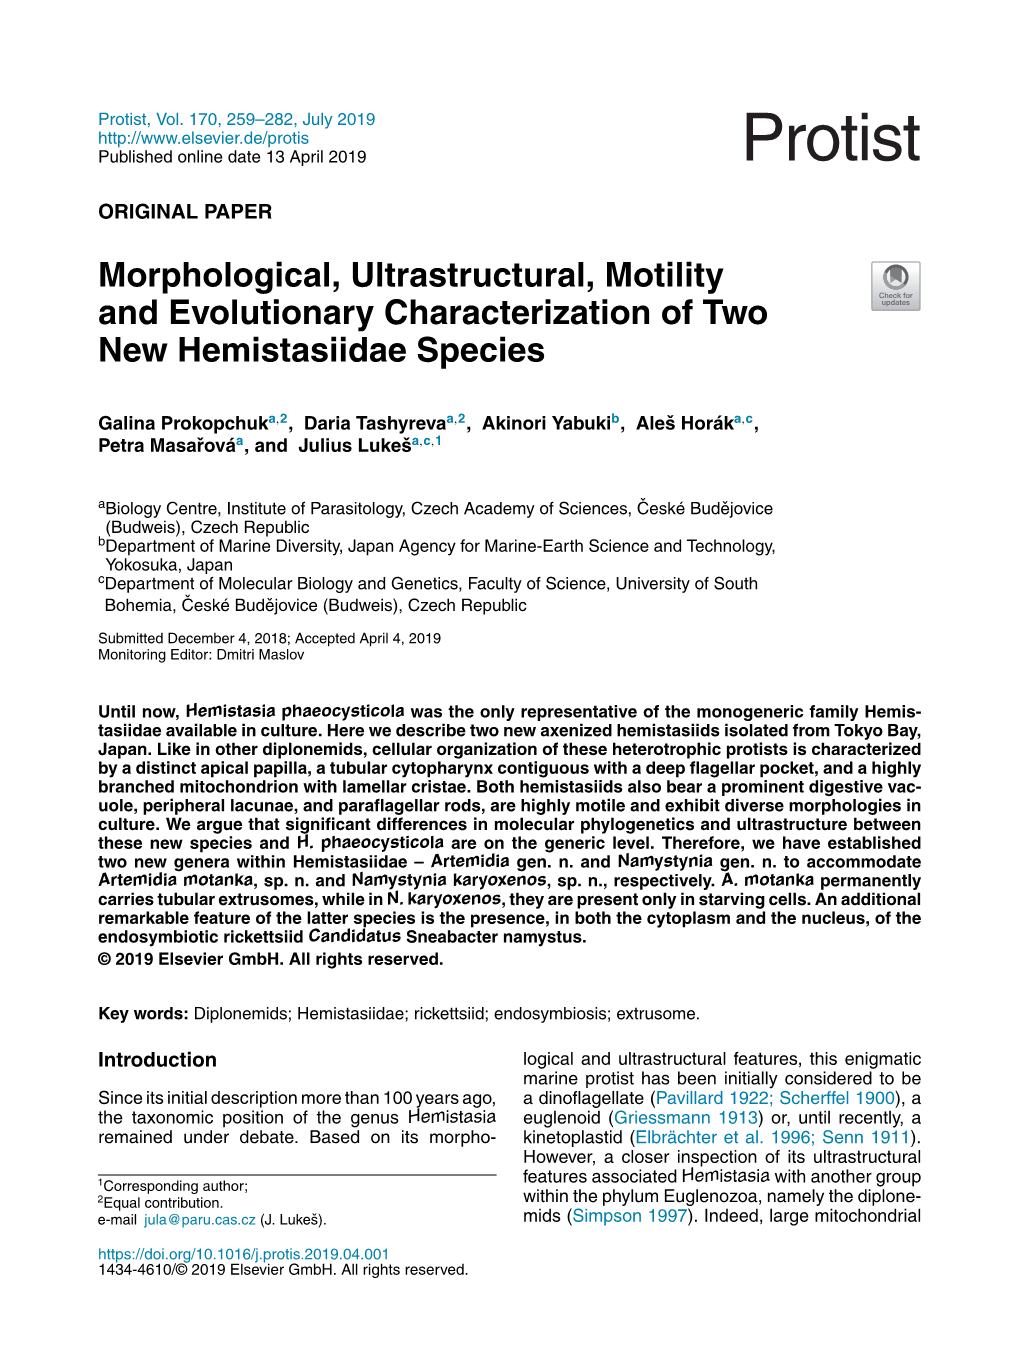 Morphological, Ultrastructural, Motility and Evolutionary Characterization